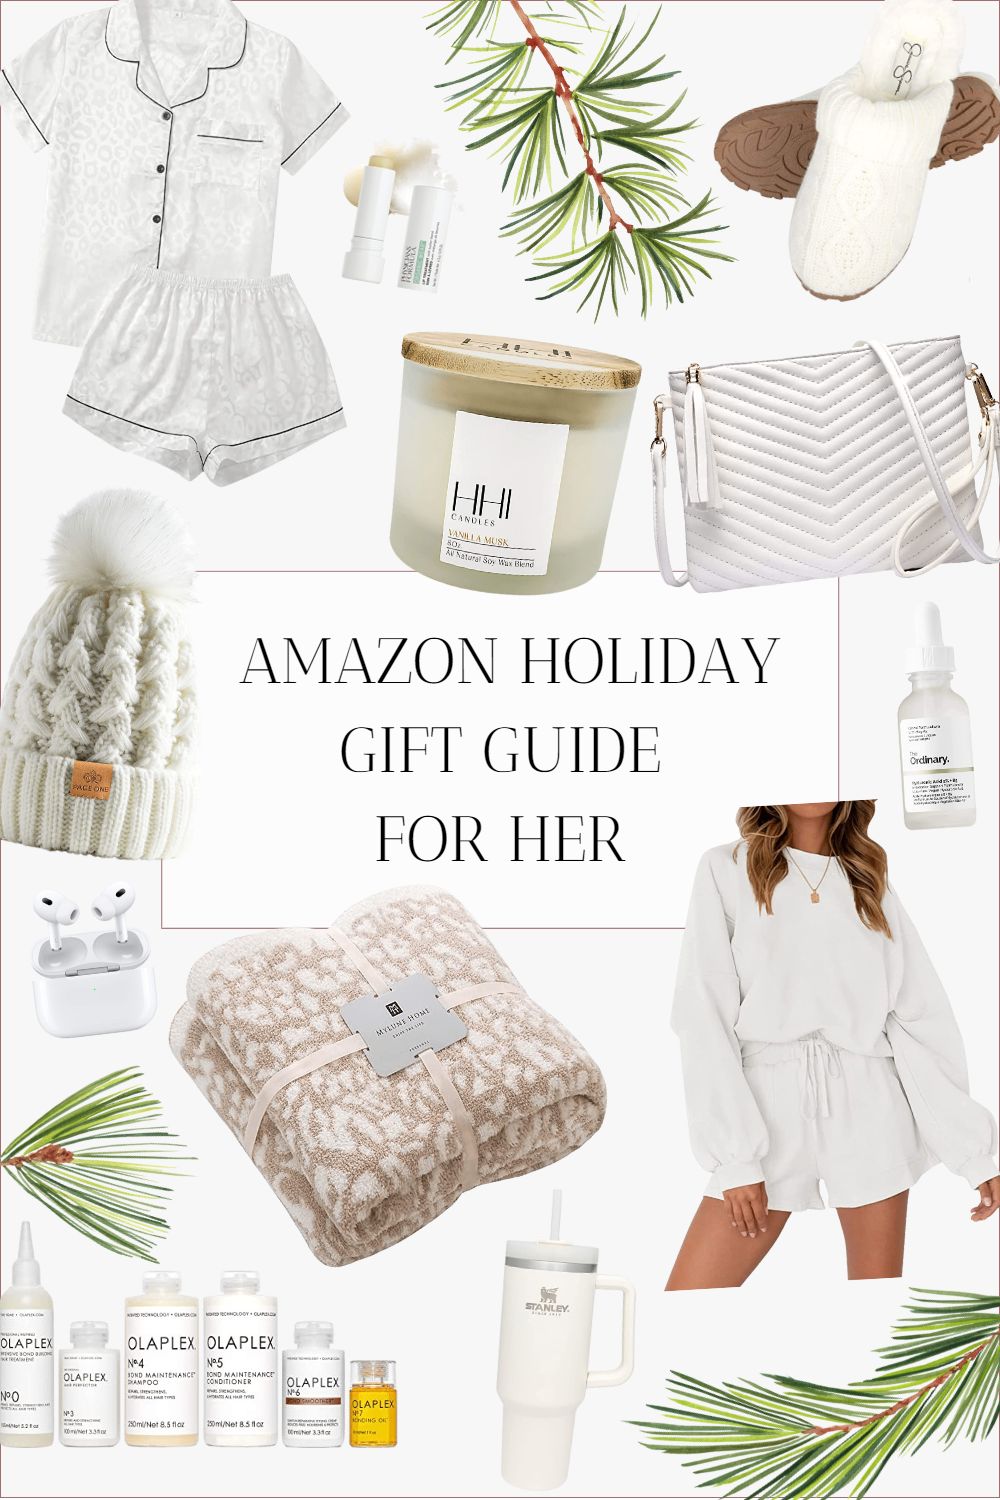 Top Amazon gifts for women. Links for our favorite best women's gifts for Christmas 2022. We've built a huge list of our top gifts from Amazon for girlfriends, wives, grandmas and sisters for the holiday season.